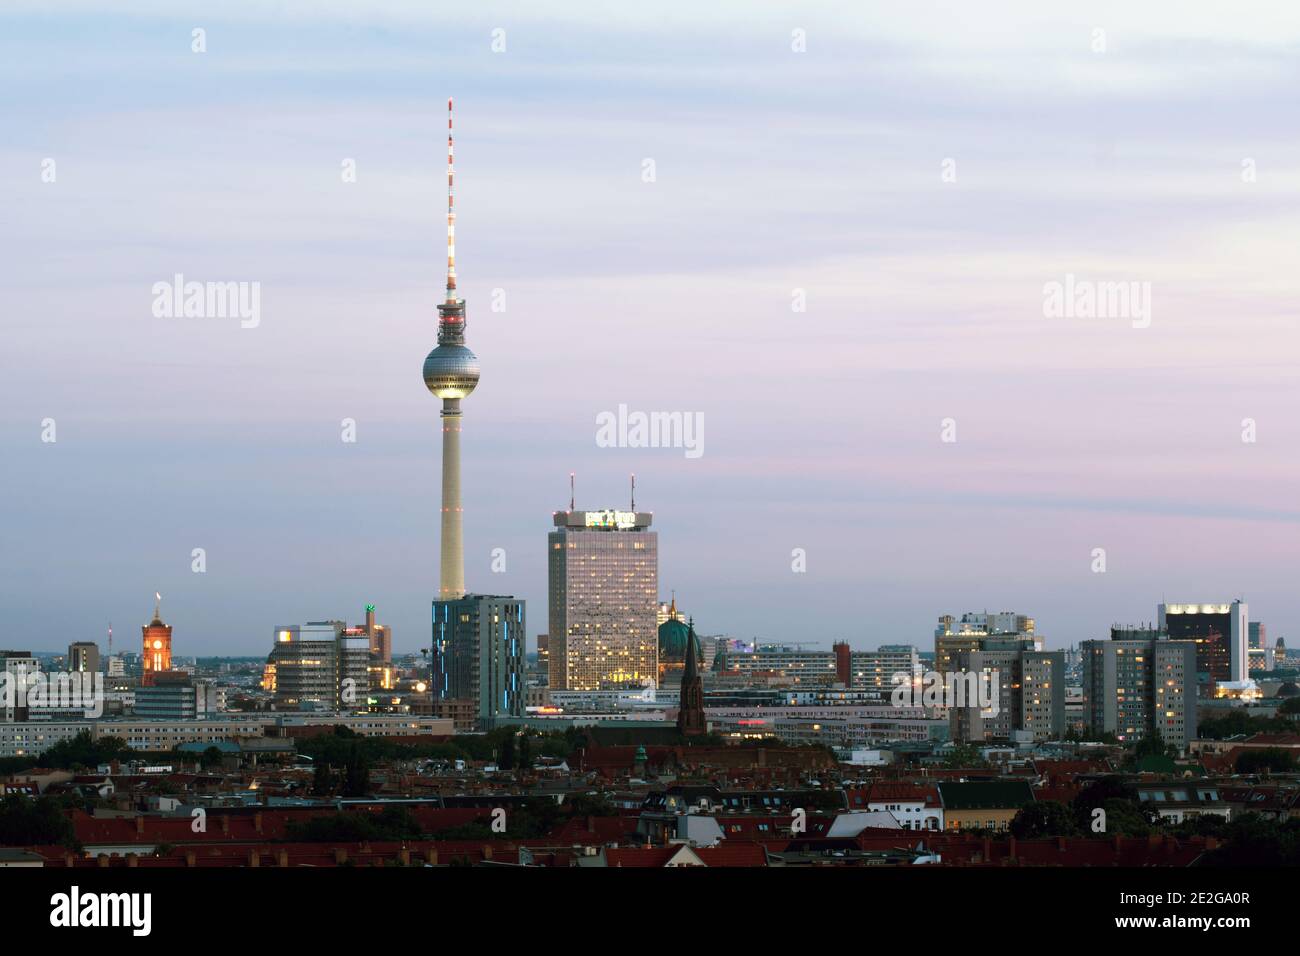 Beautiful shot of the Berliner Fernsehturm tower in Central Berlin, Germany Stock Photo